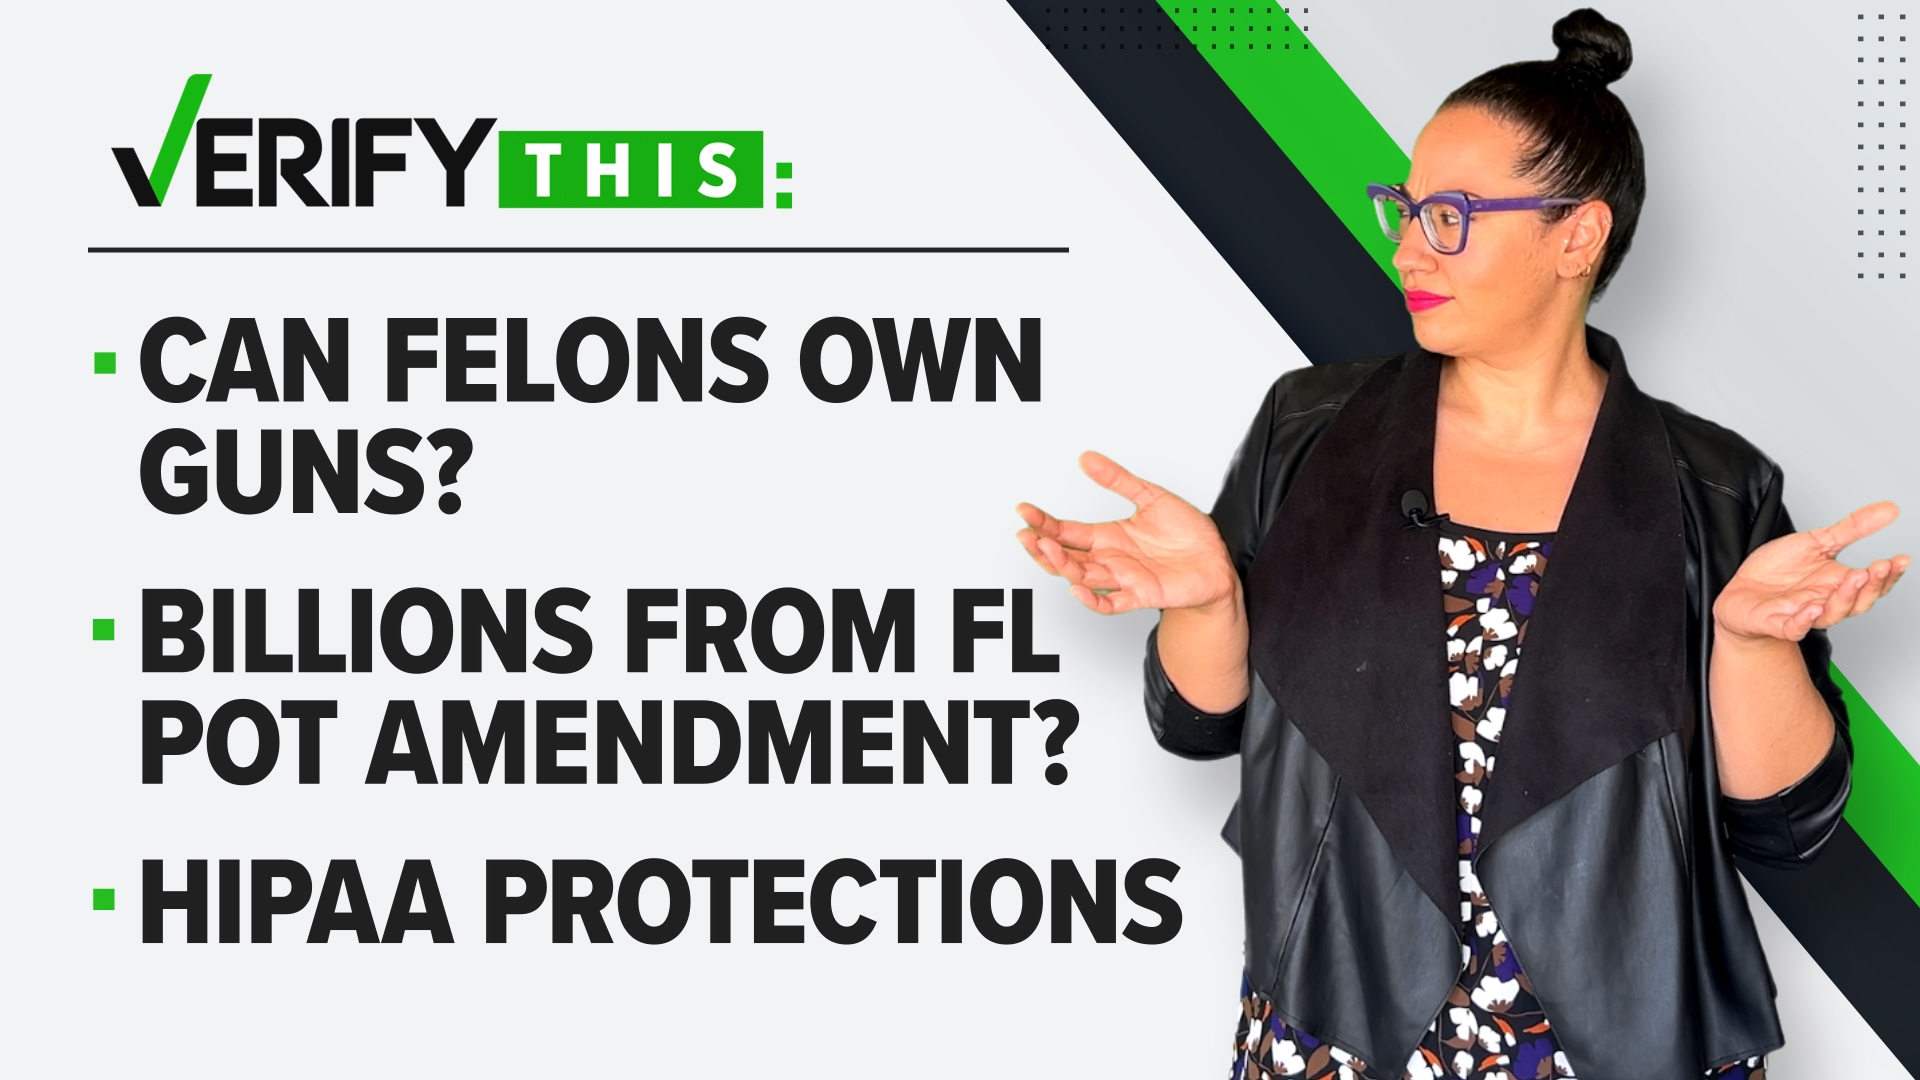 In this week's episode, we verify if felons and marijuana users can legally own guns and what medical data does HIPAA actually protect.